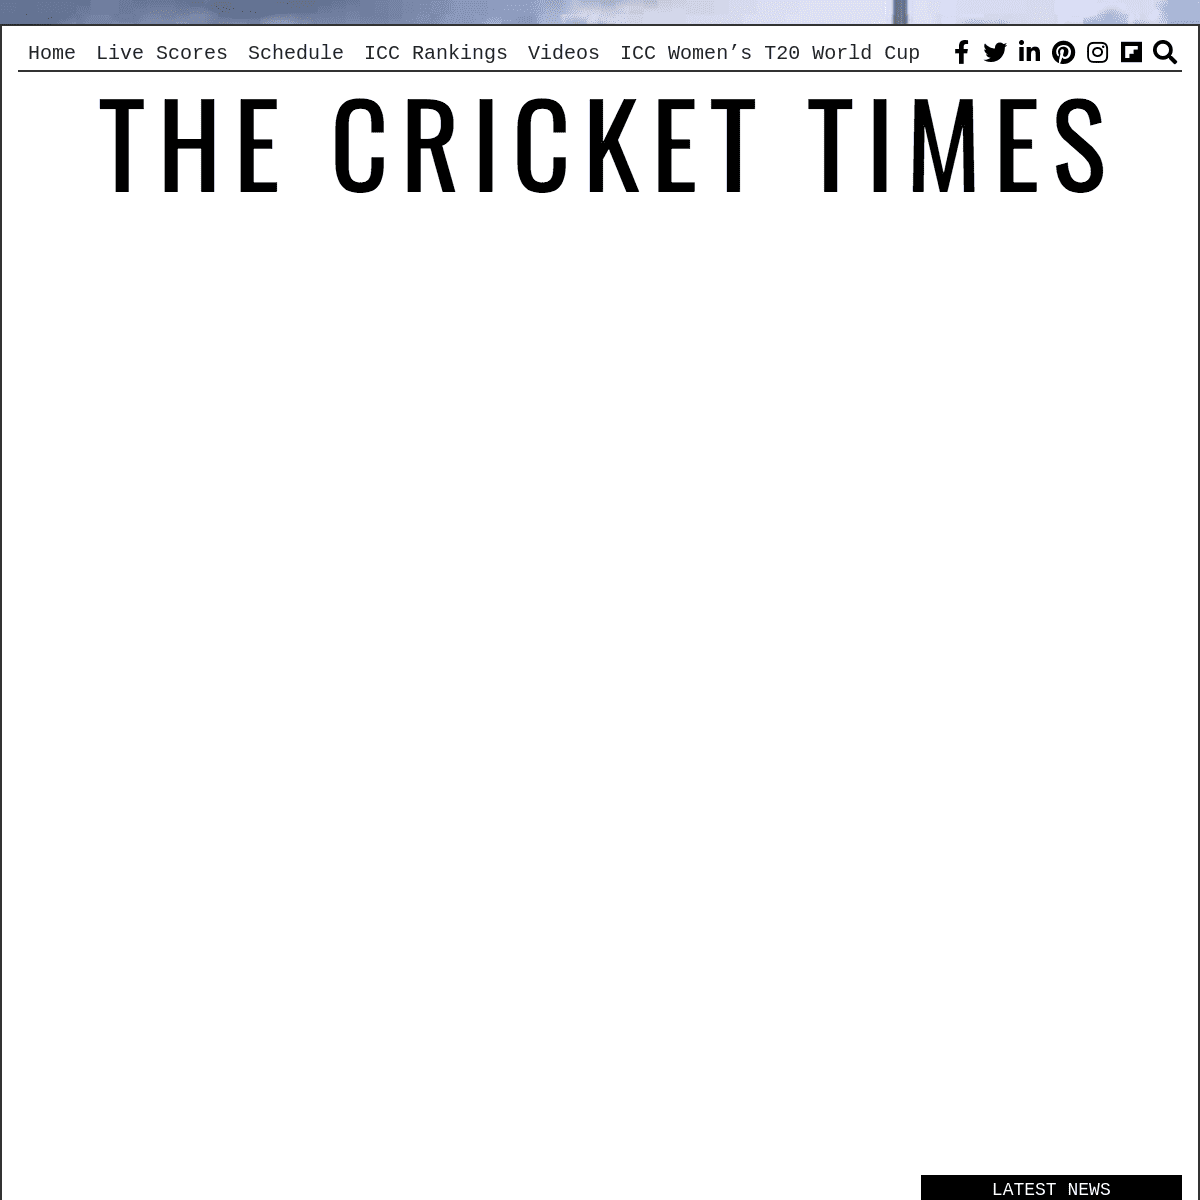 A complete backup of crickettimes.com/2020/02/new-zealand-vs-india-test-series-fixtures-squads-and-live-streaming-details/